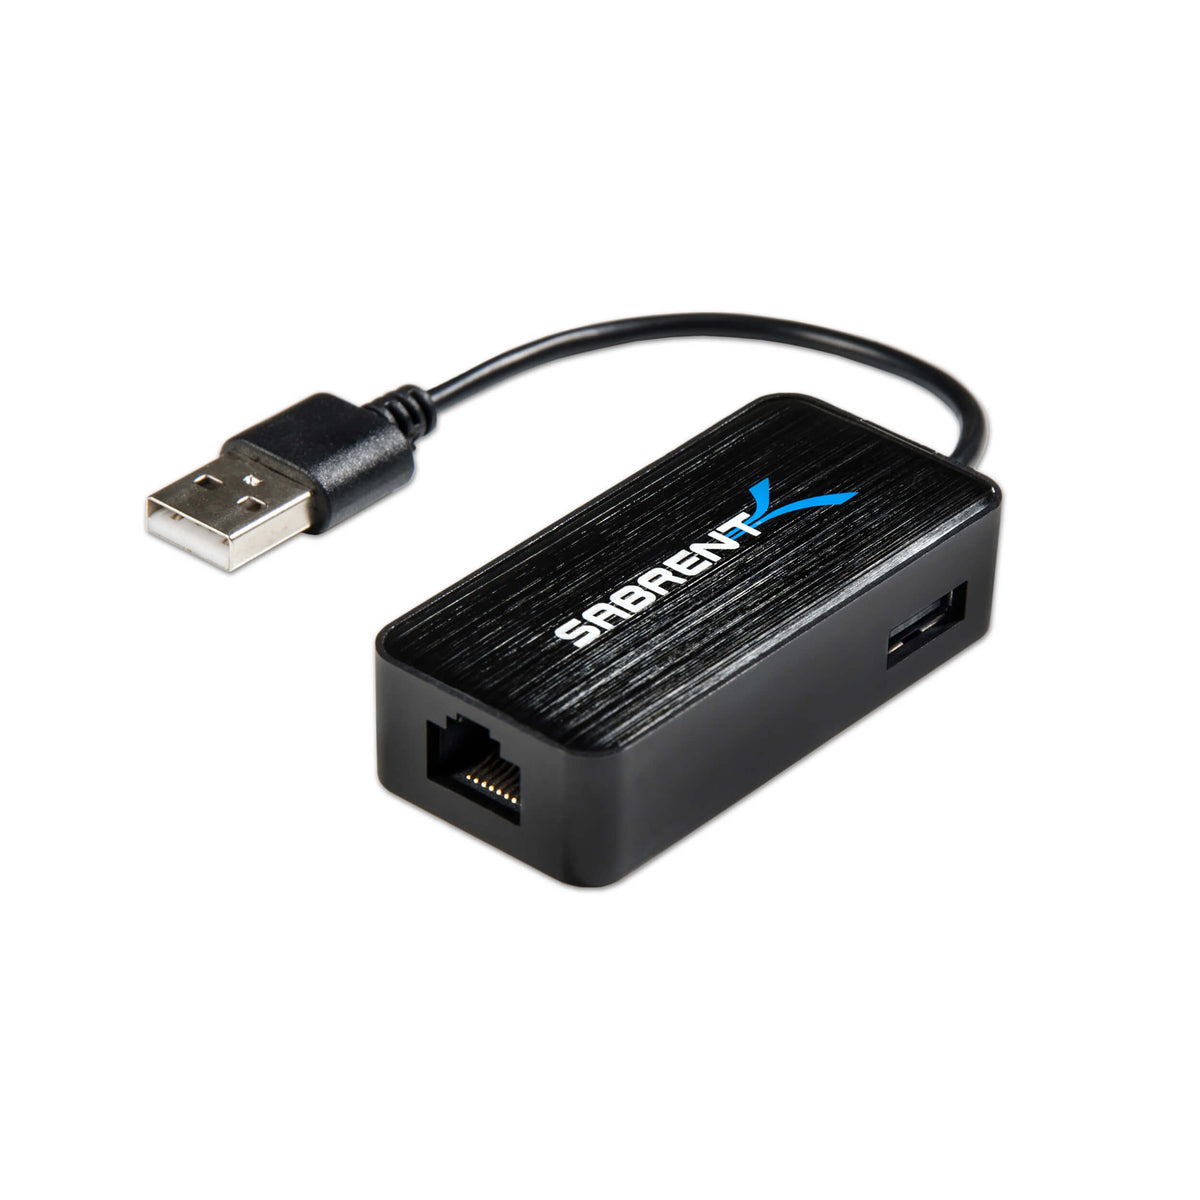 USB 2.0 to 10/100 Network Adapter And USB Hub